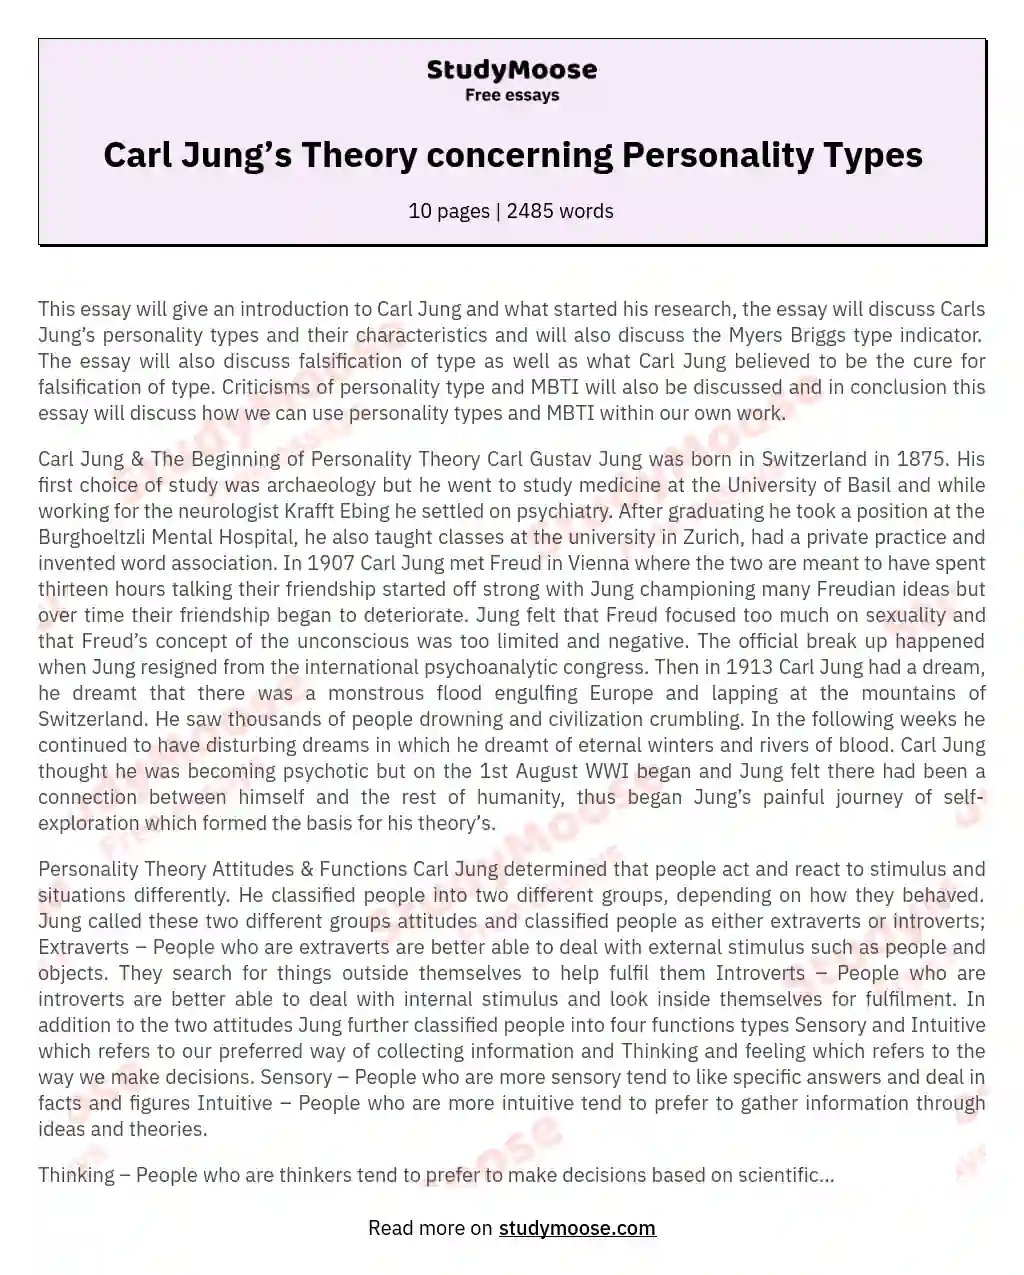 Carl Jung’s Theory concerning Personality Types